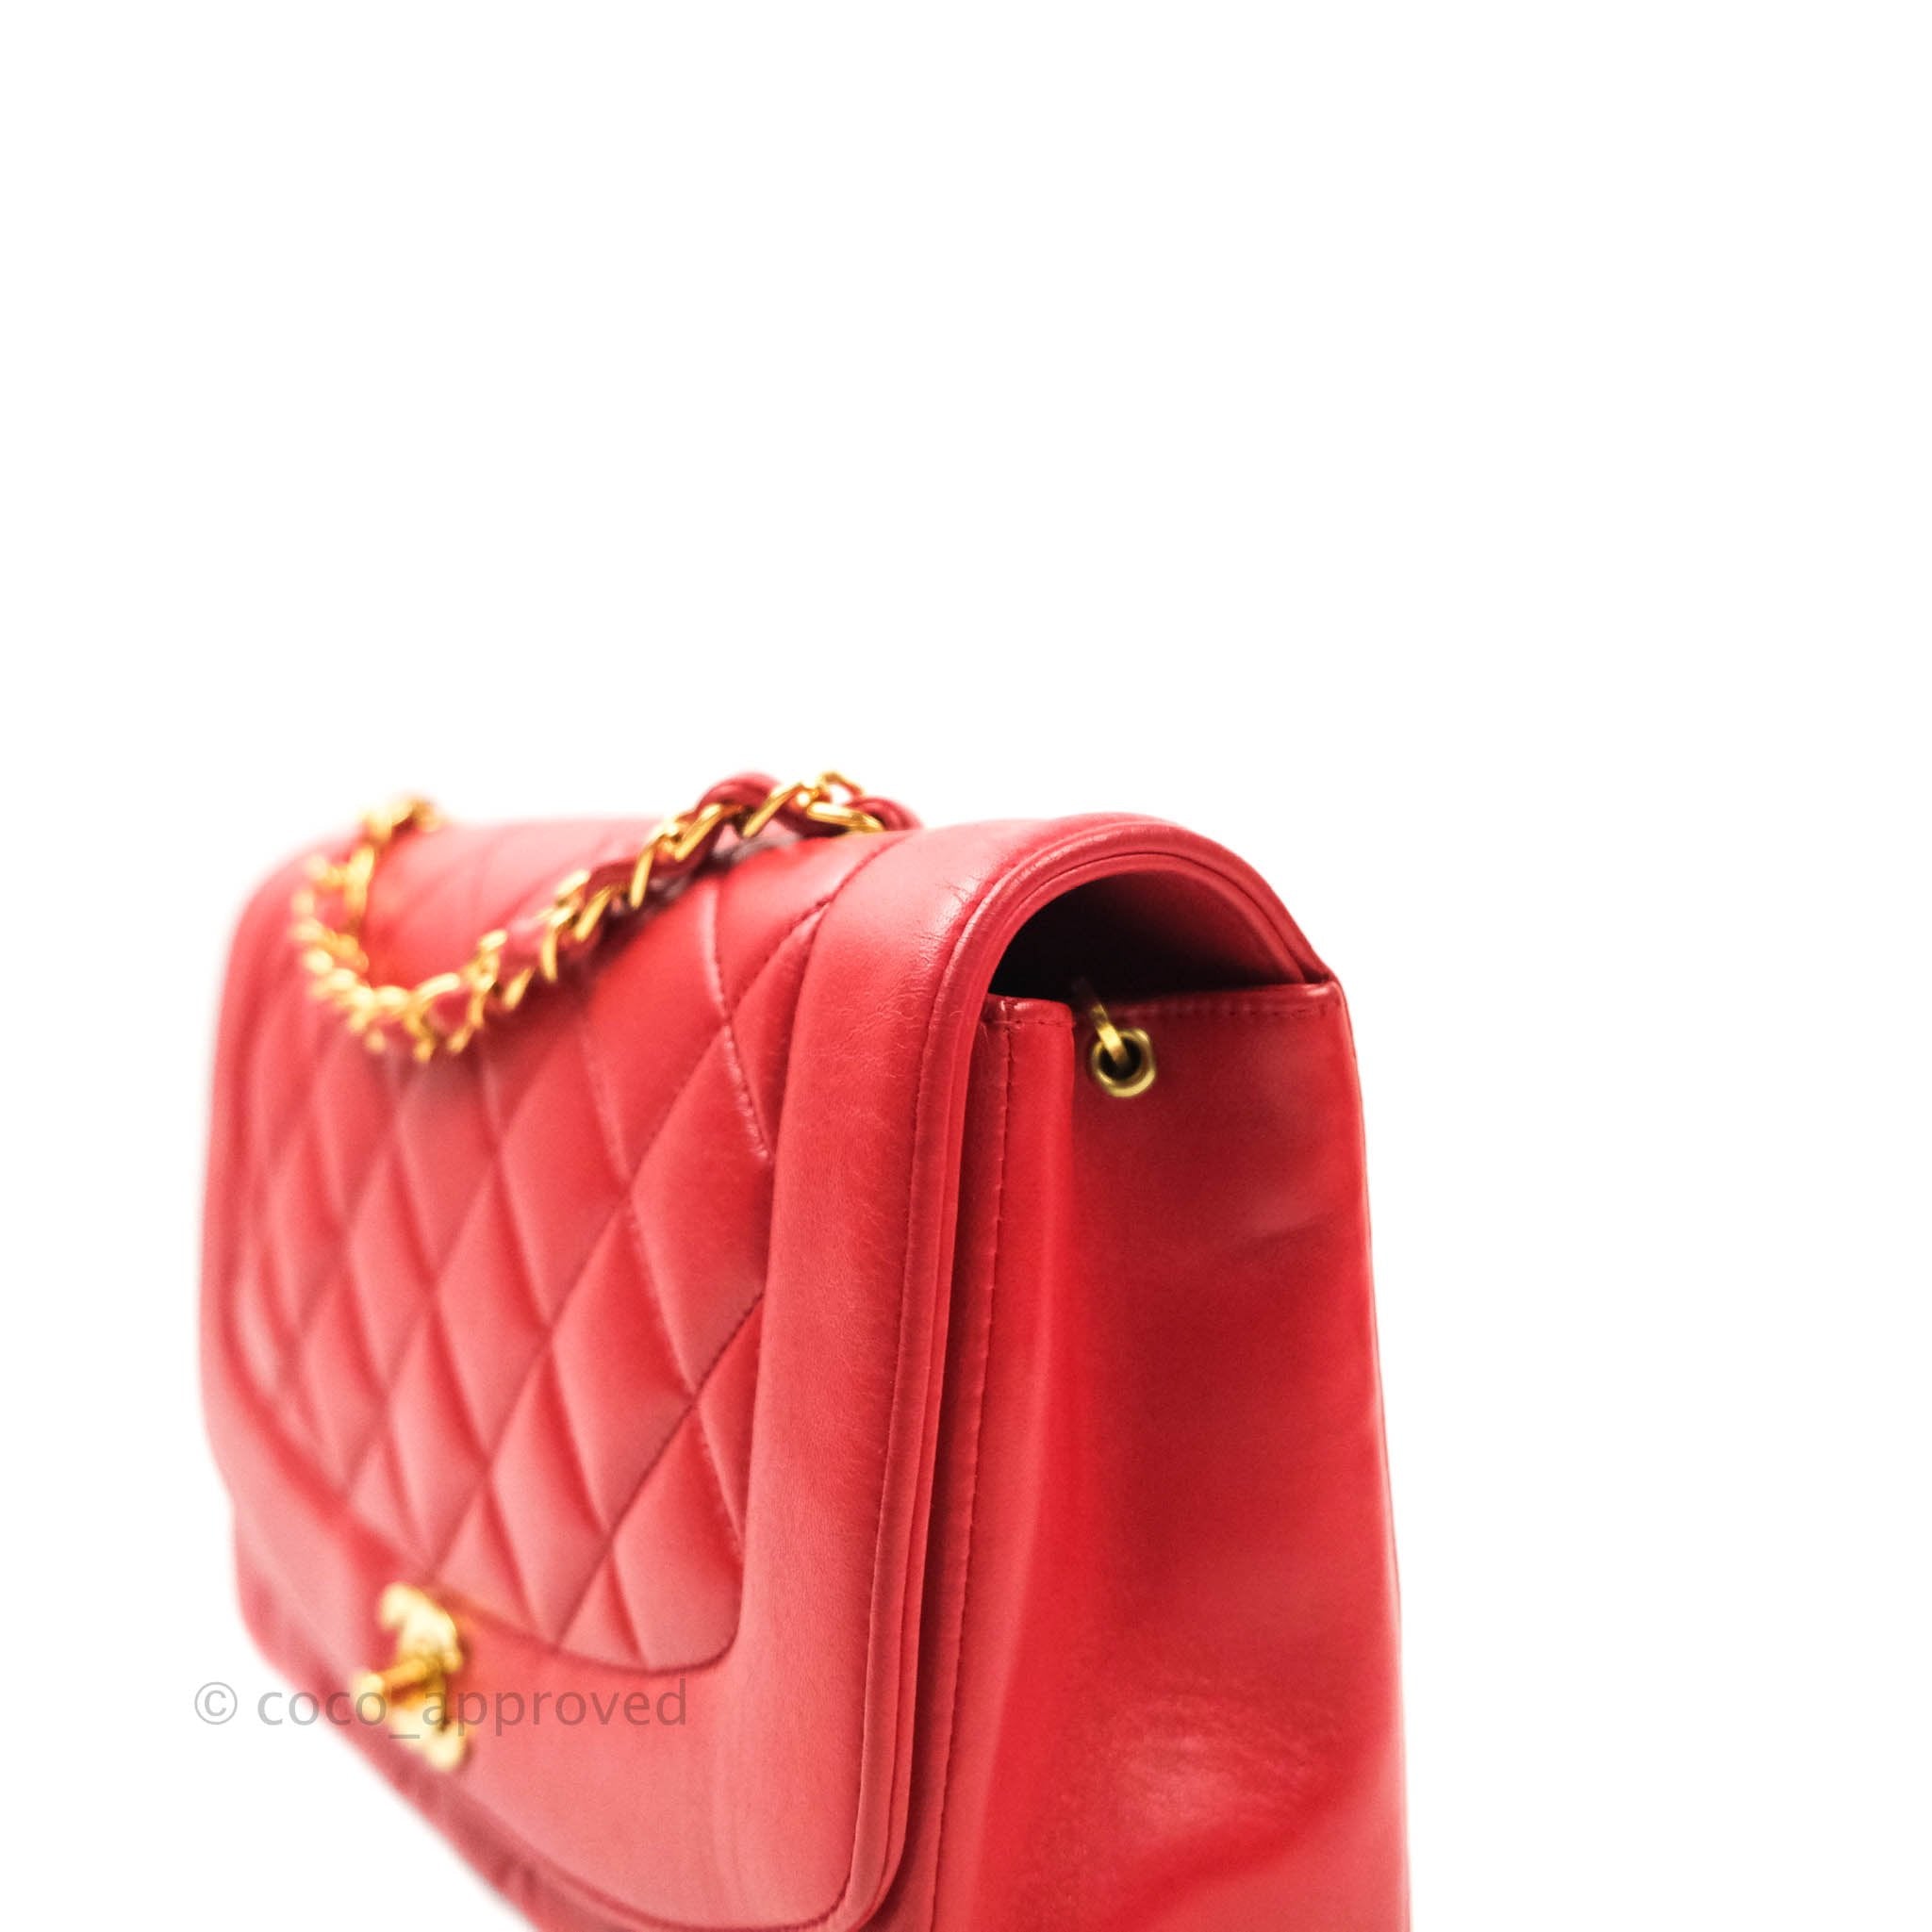 Buy Chanel Vintage Diana Flap Bag Quilted Lambskin Small 1459001